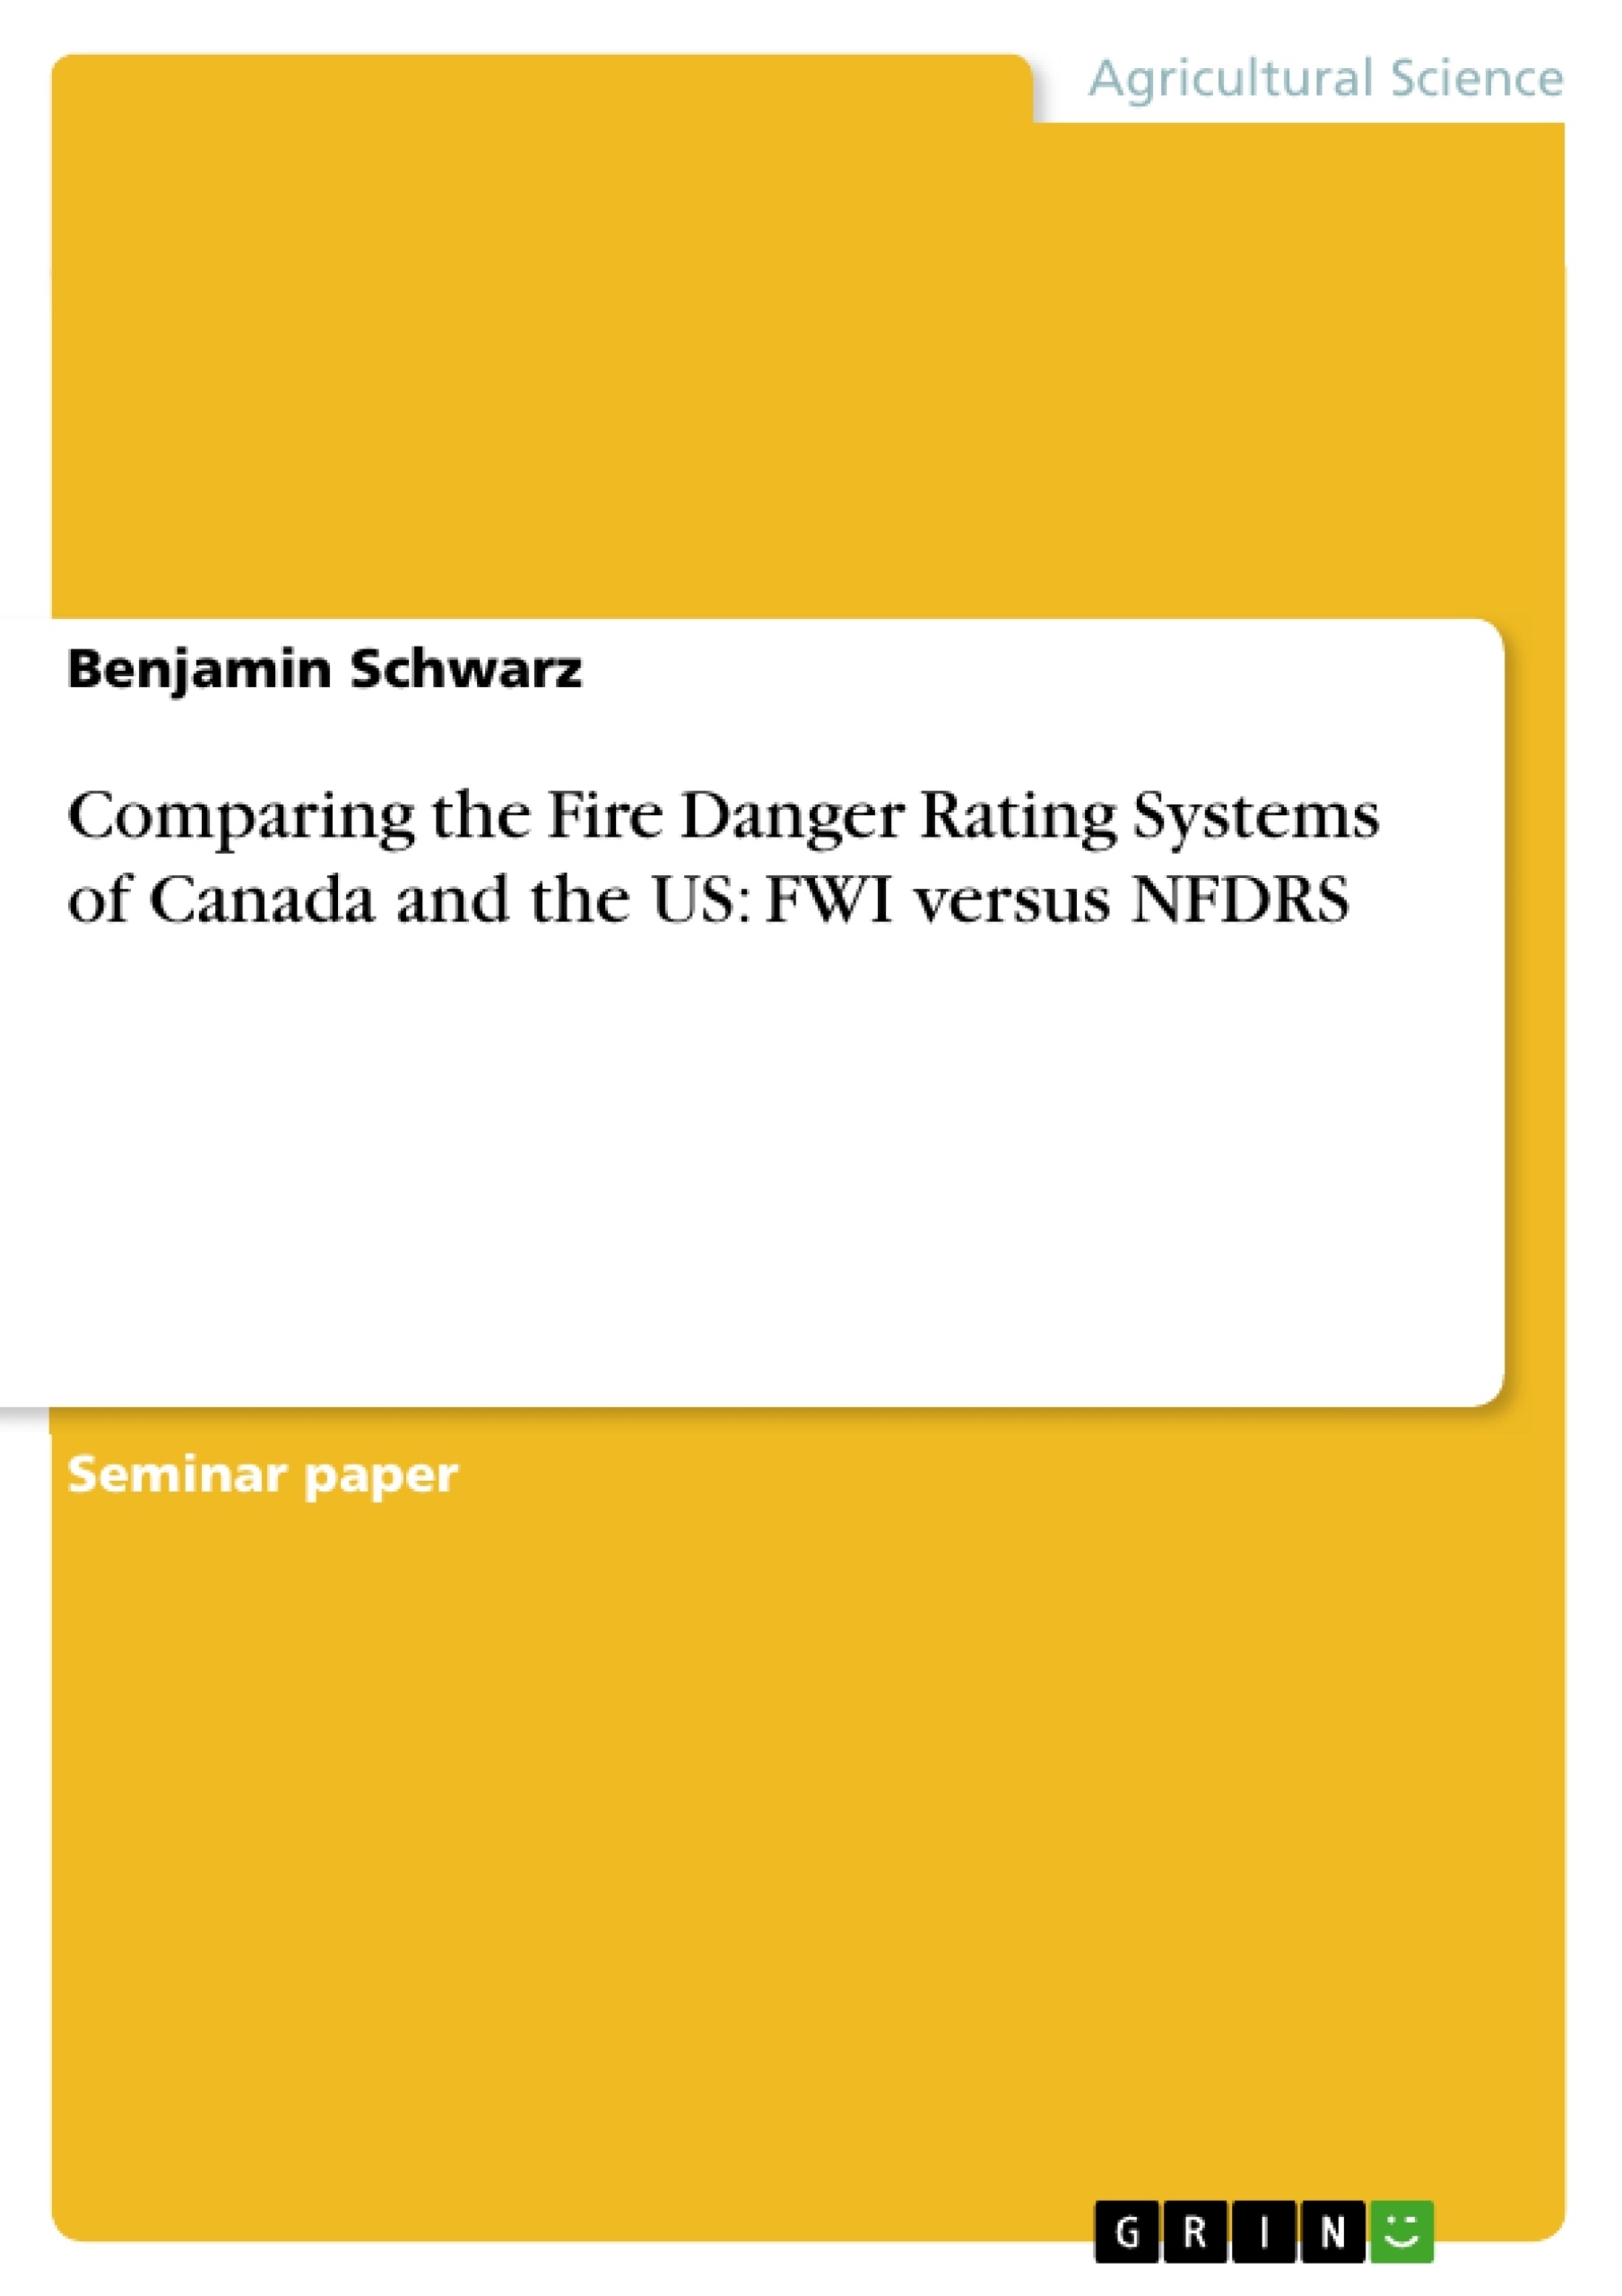 Título: Comparing the Fire Danger Rating Systems of Canada and the US: FWI versus NFDRS